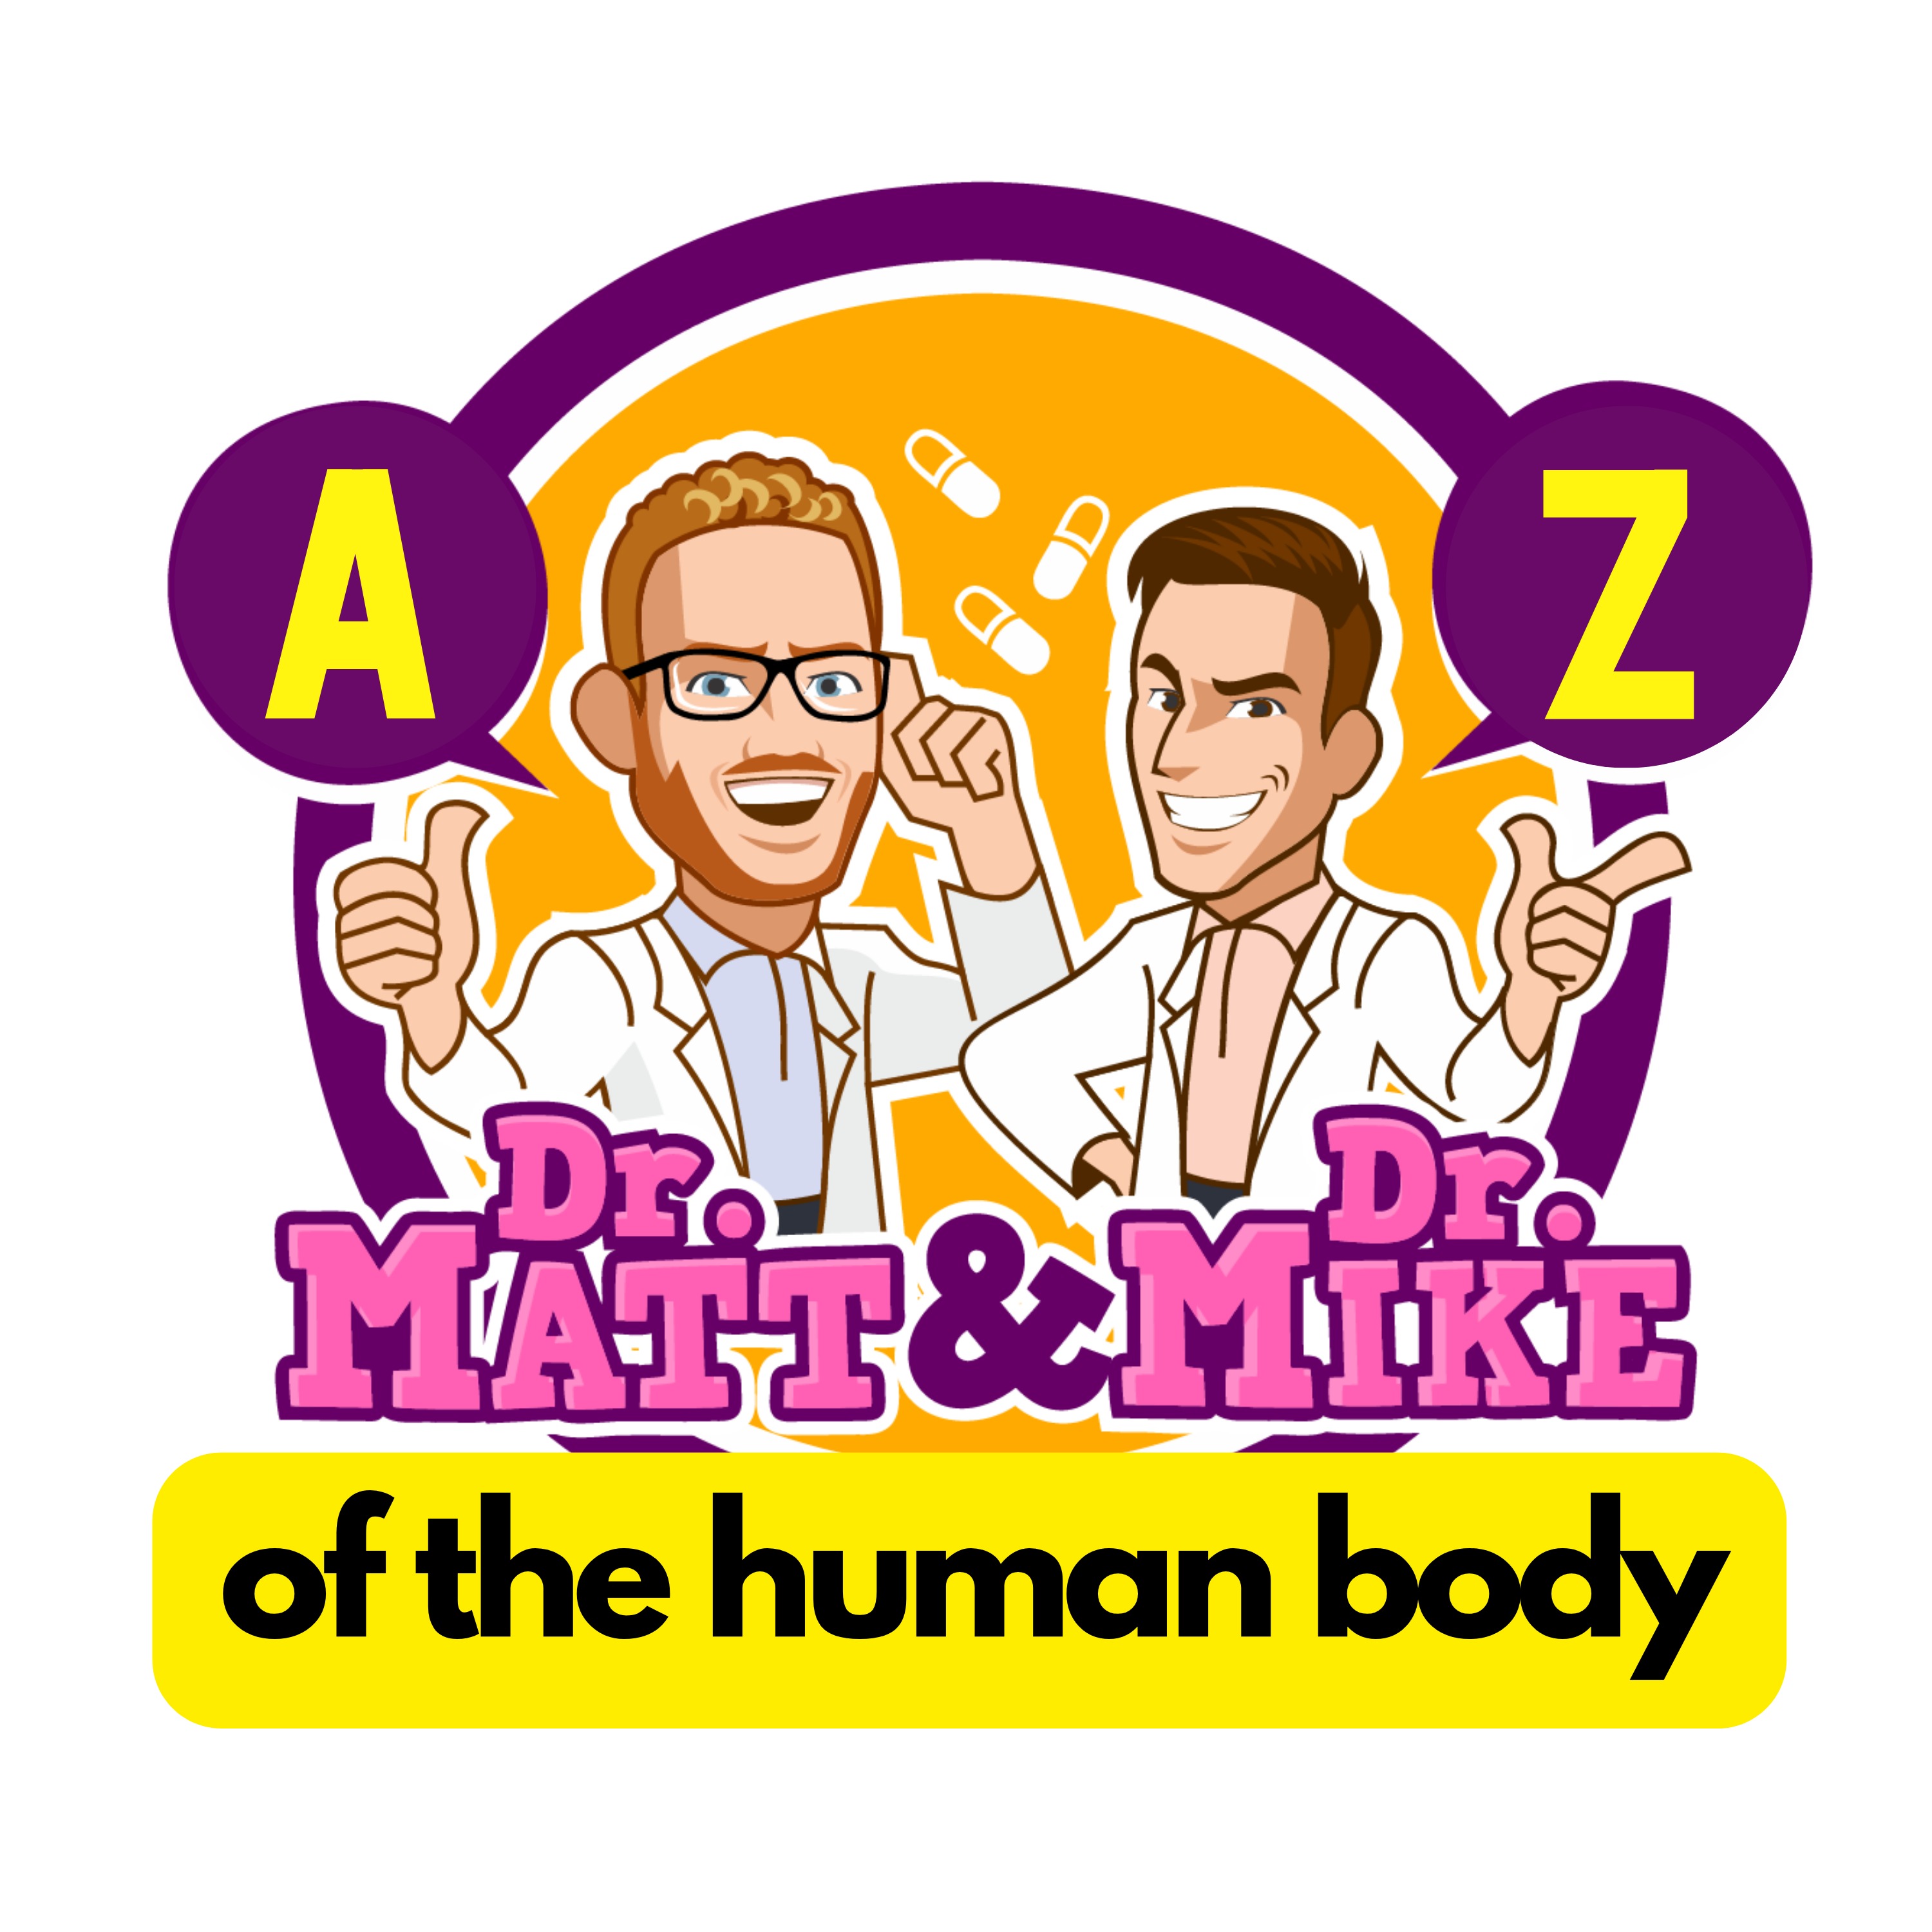 Androgen Binding Protein (ABP) | A-Z of the Human Body